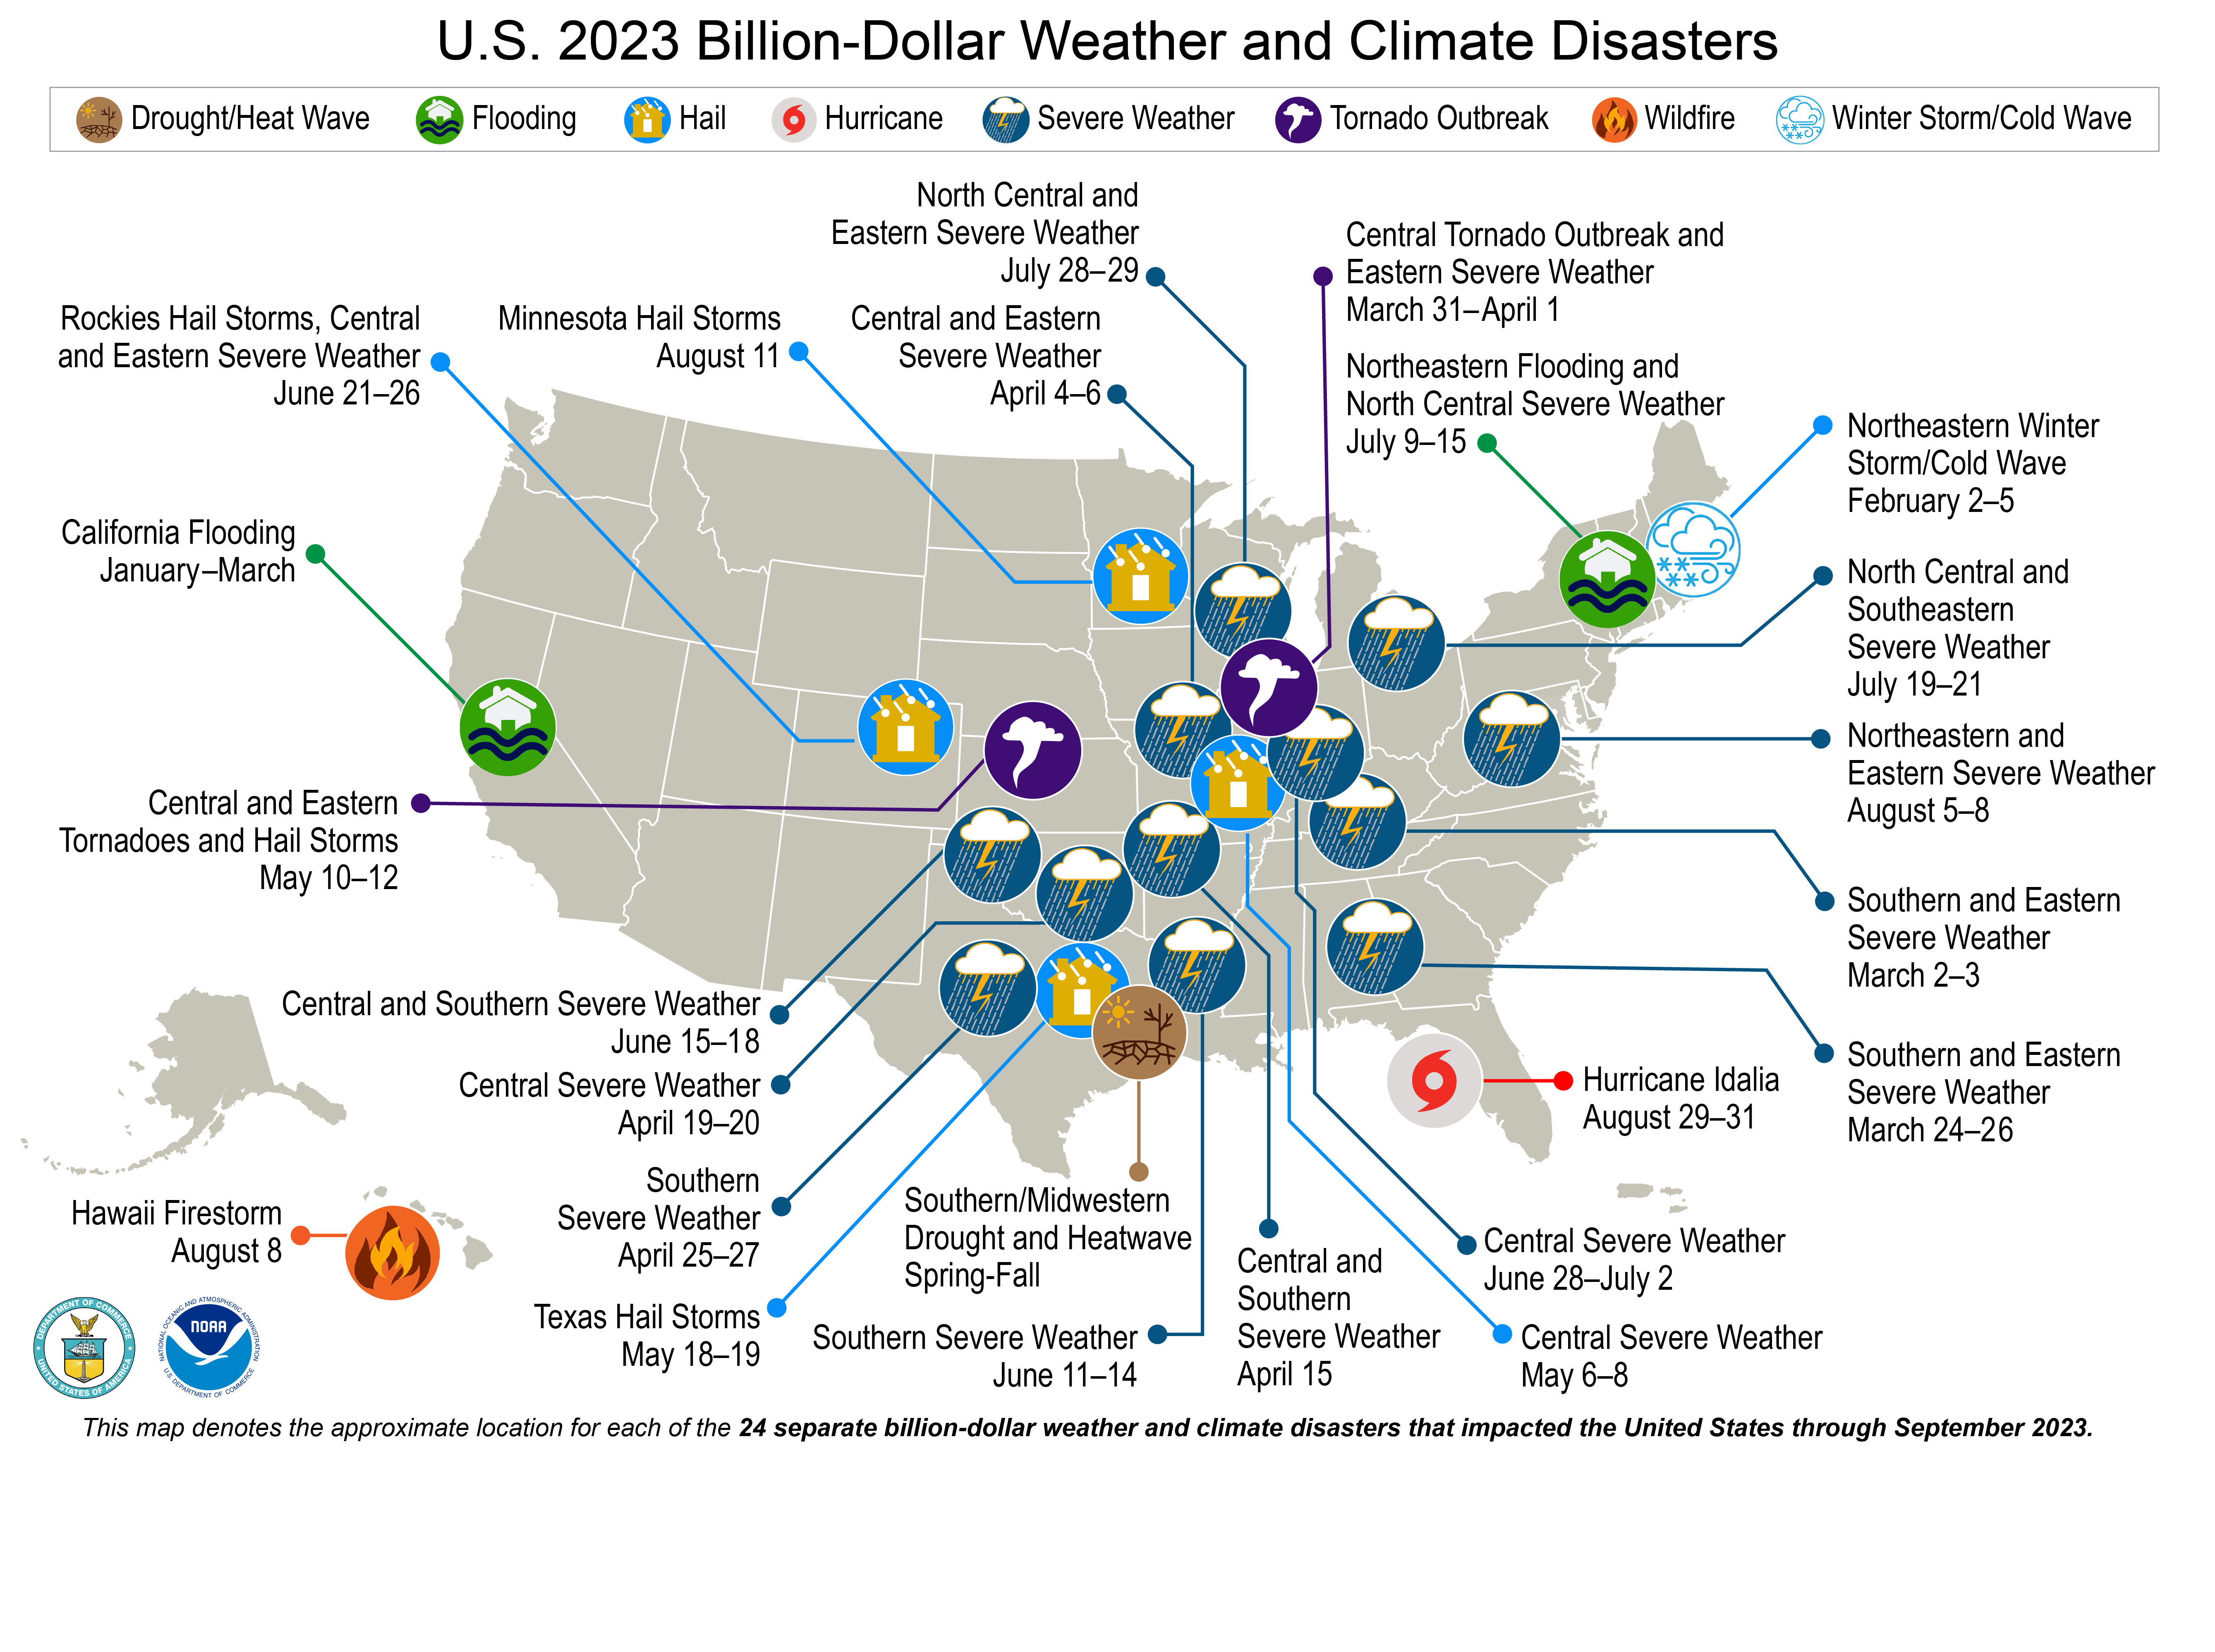 Alt text: Map of the U.S. explaining all billion-dollar disasters that have occurred from January to September 2023.